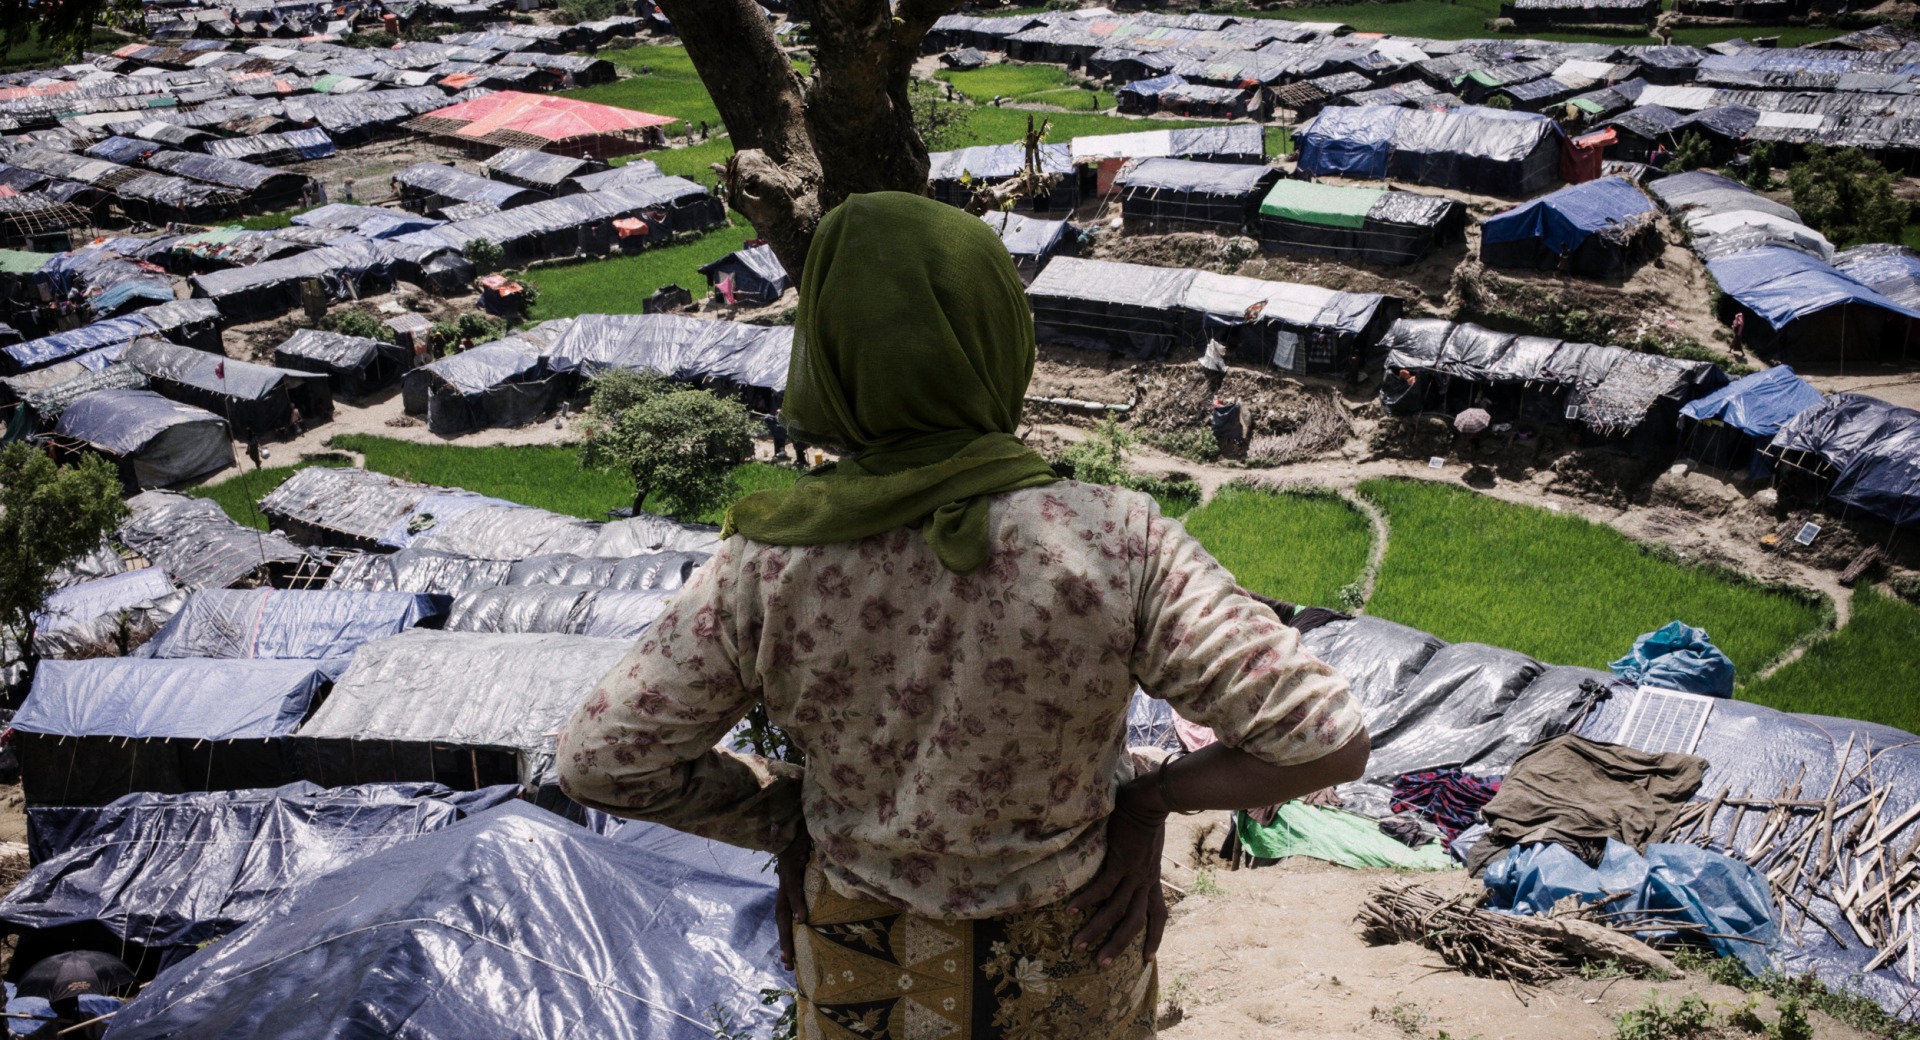 A Rohingya woman looks out over the camps in Cox's Bazar.